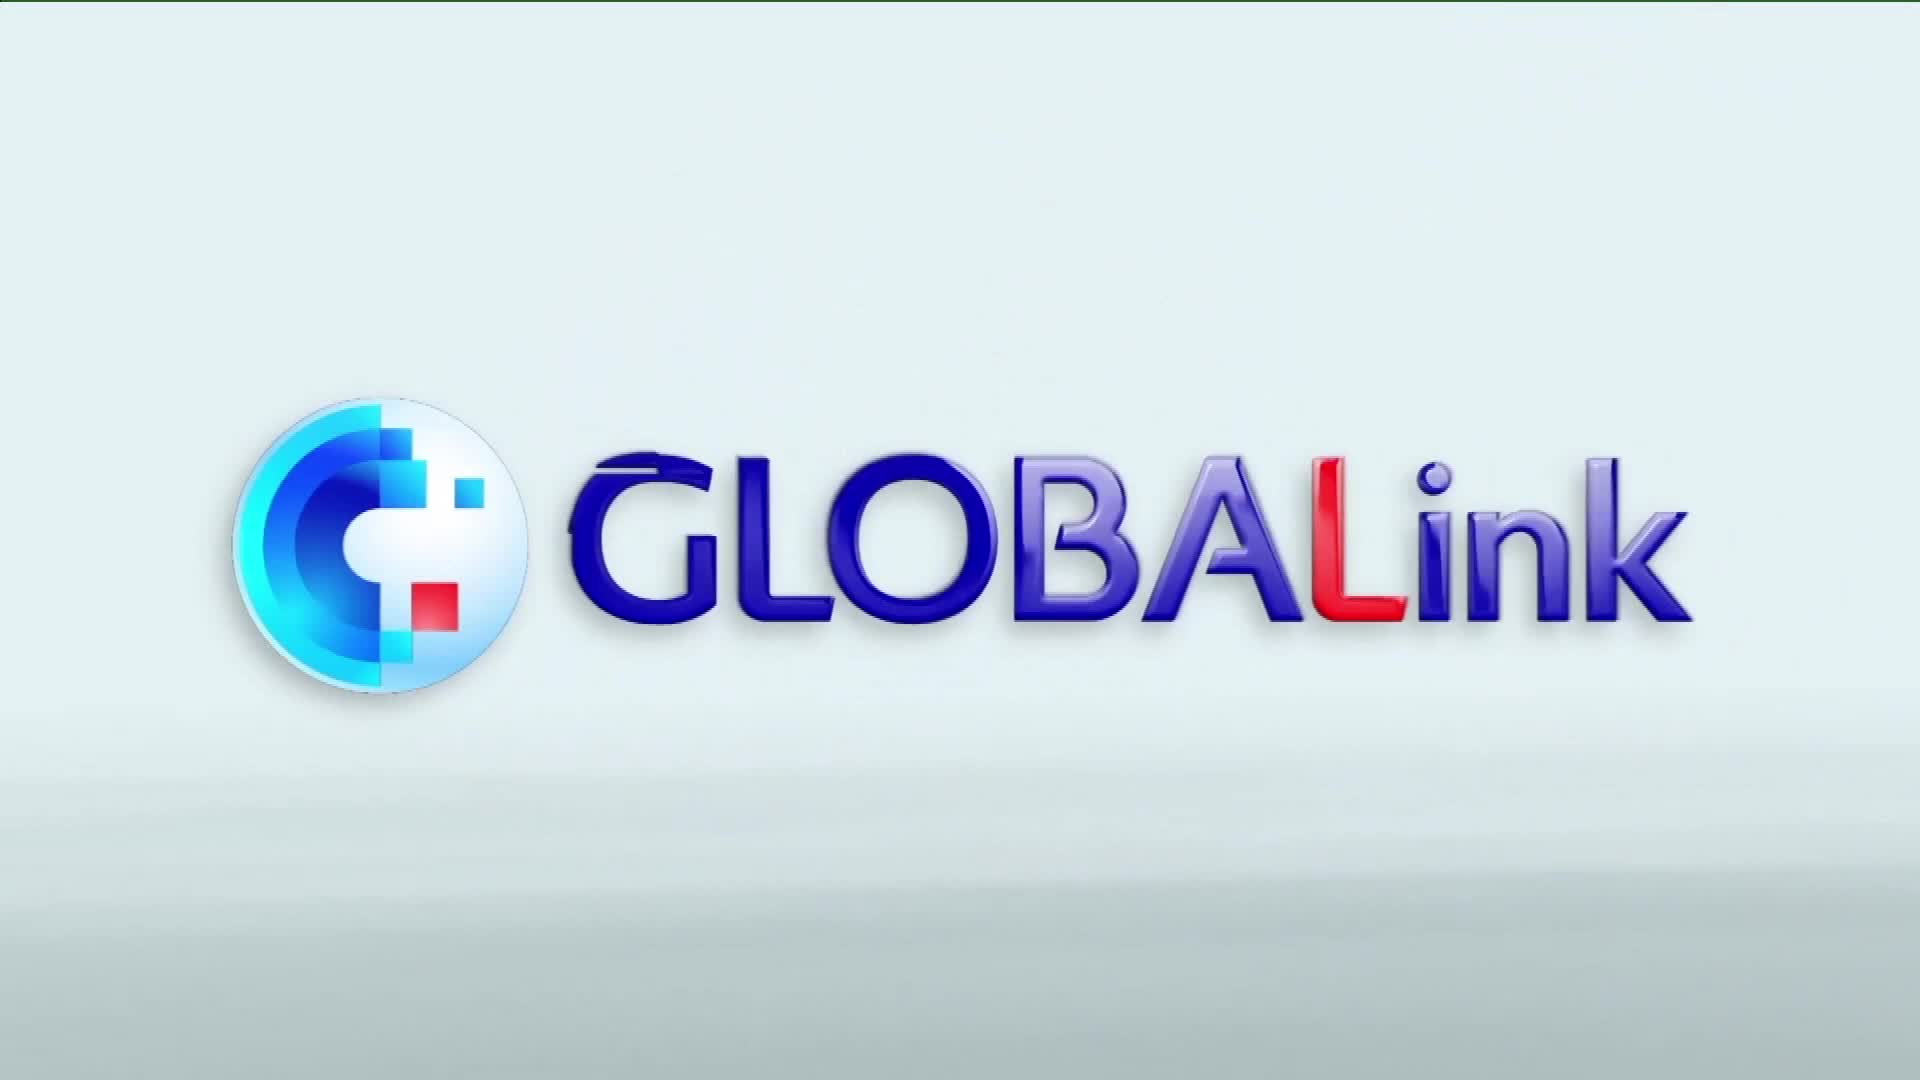 GLOBALink | Working Together to Build a Better World